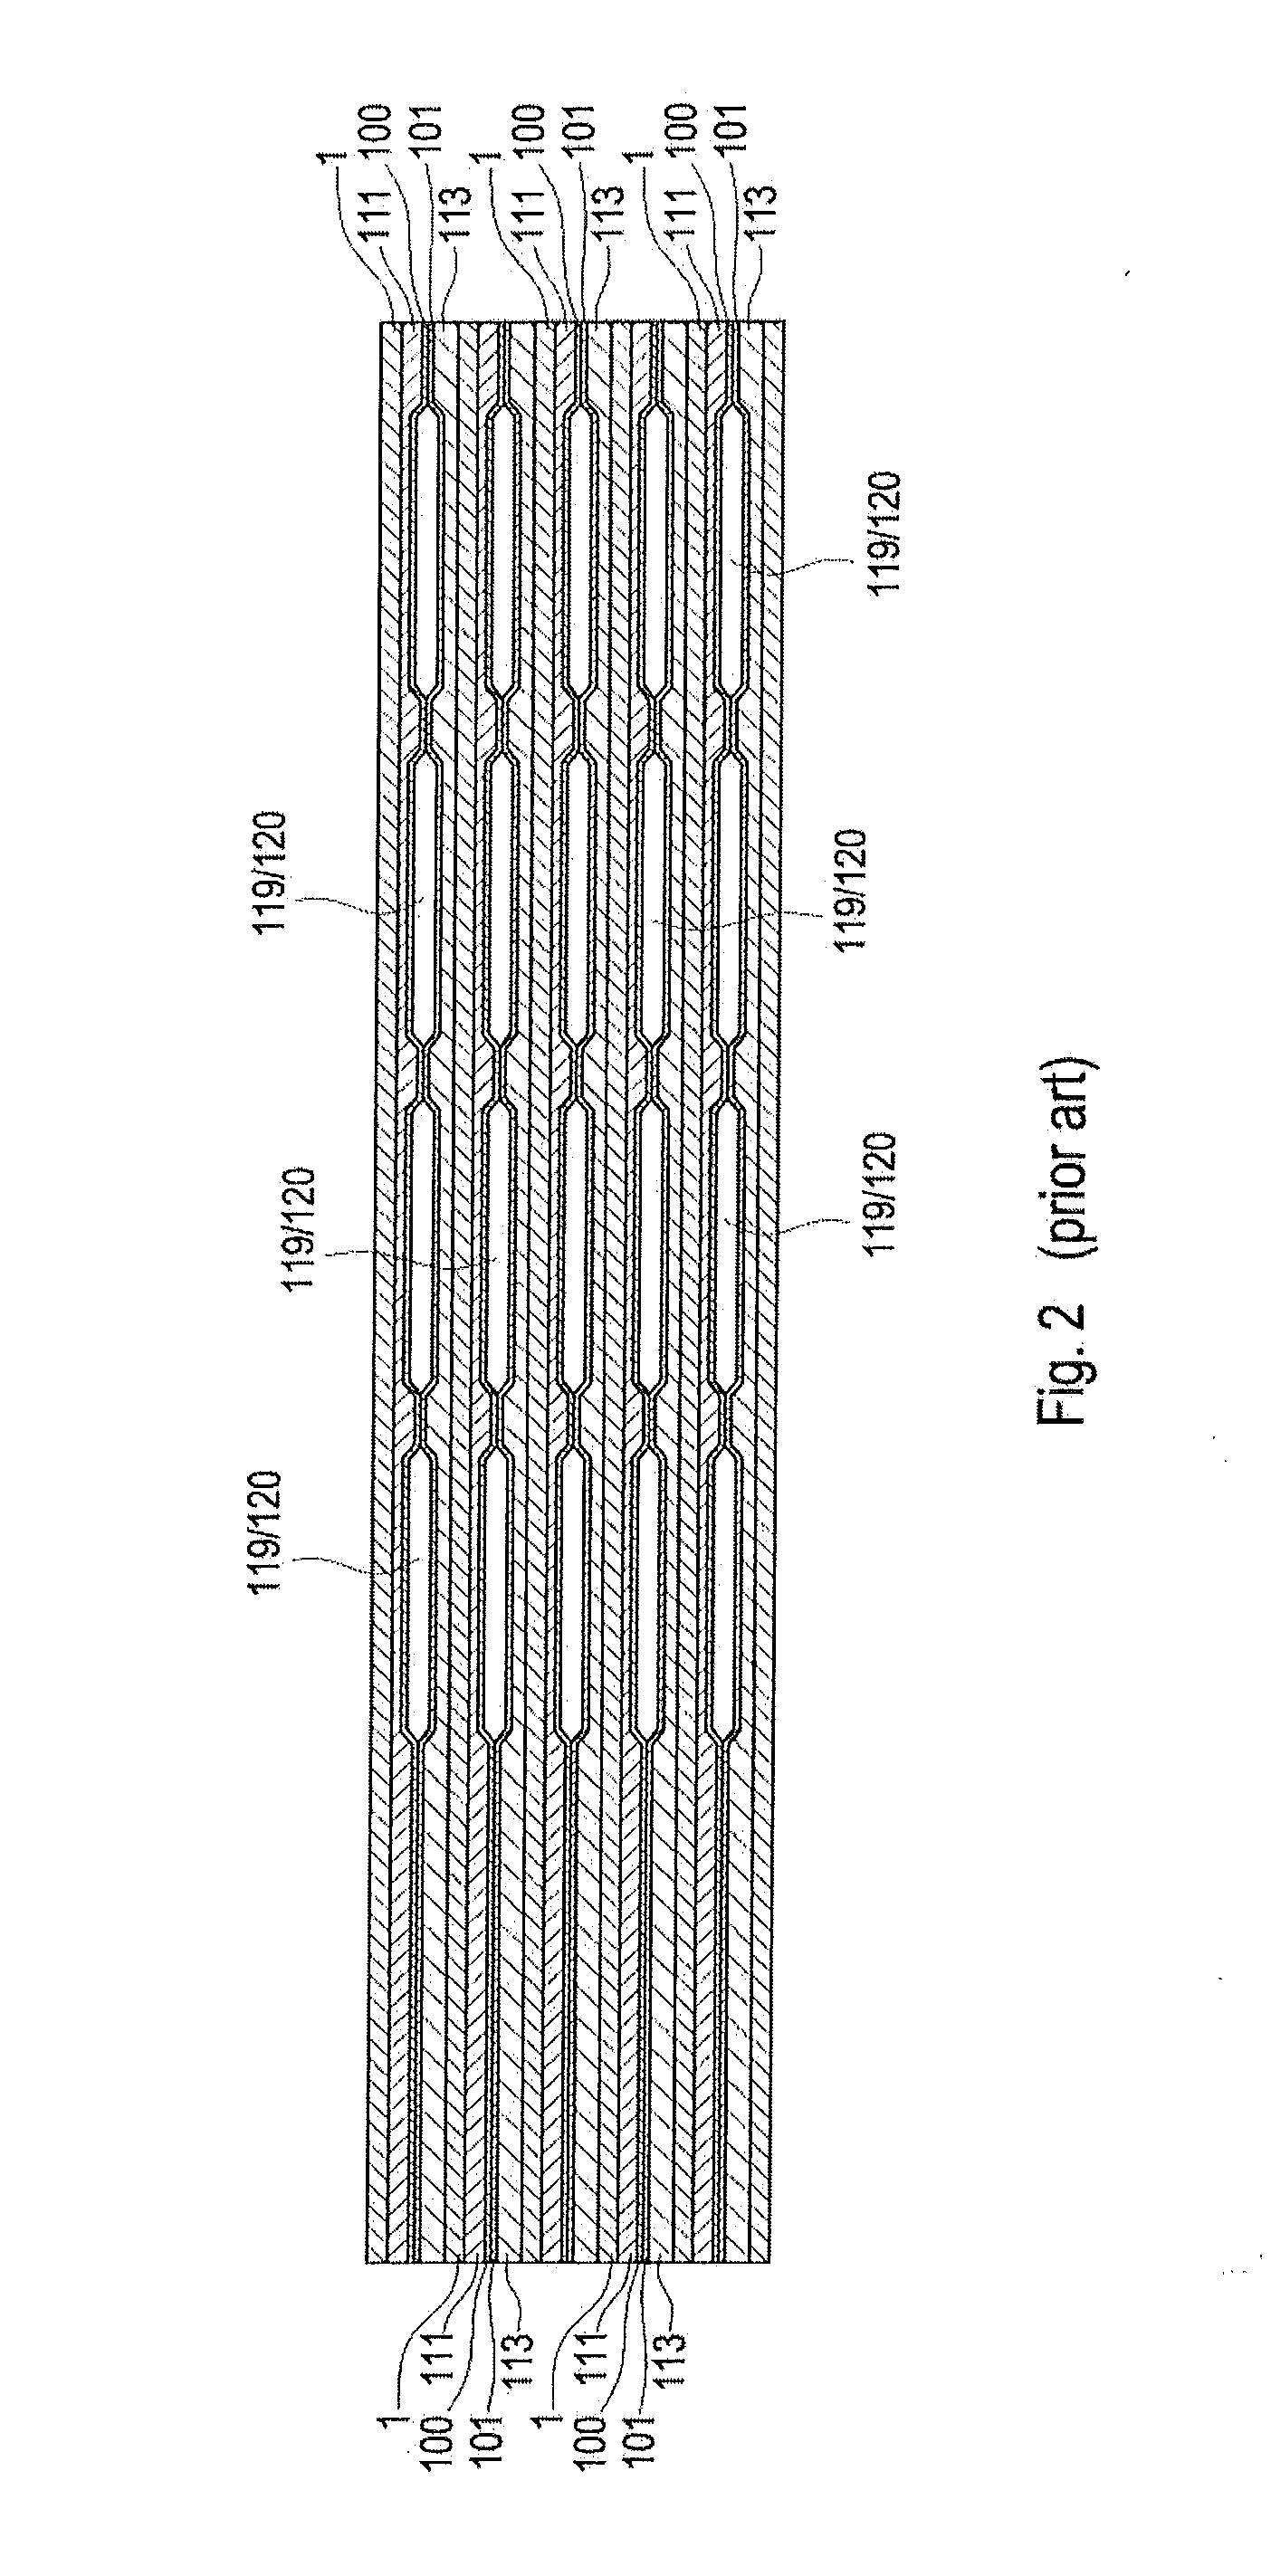 Flow field plate for improved coolant flow